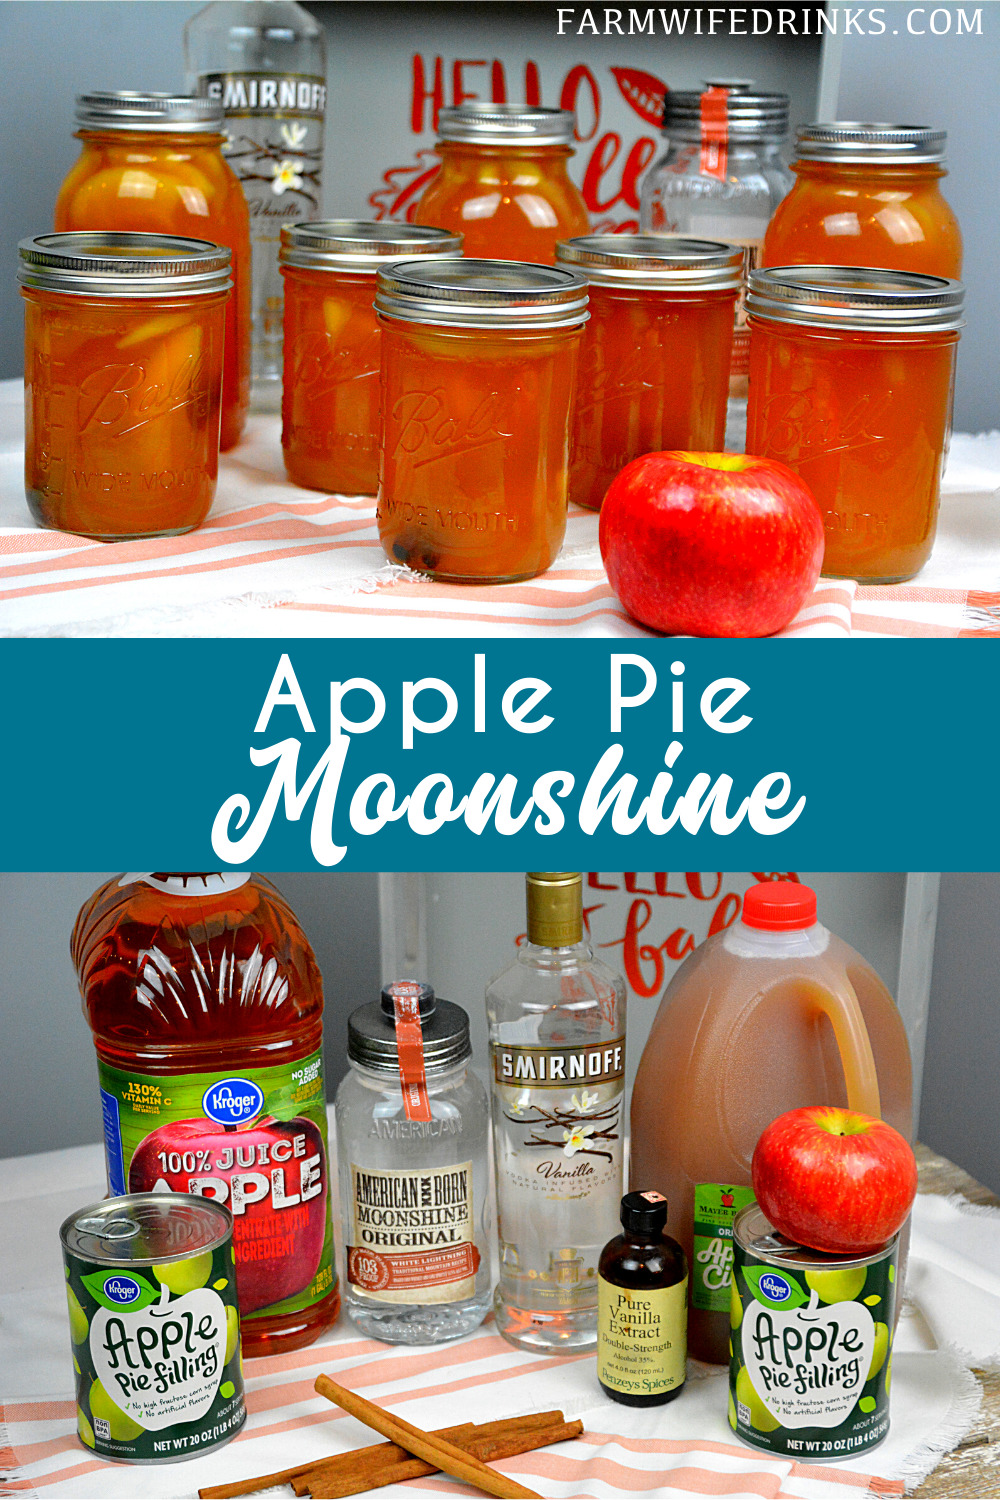 Apple pie moonshine combines apple cider and juice with apple pie filling with cinnamon sticks and vanilla with moonshine and vanilla vodka to create your new favorite fall liquor to drink.